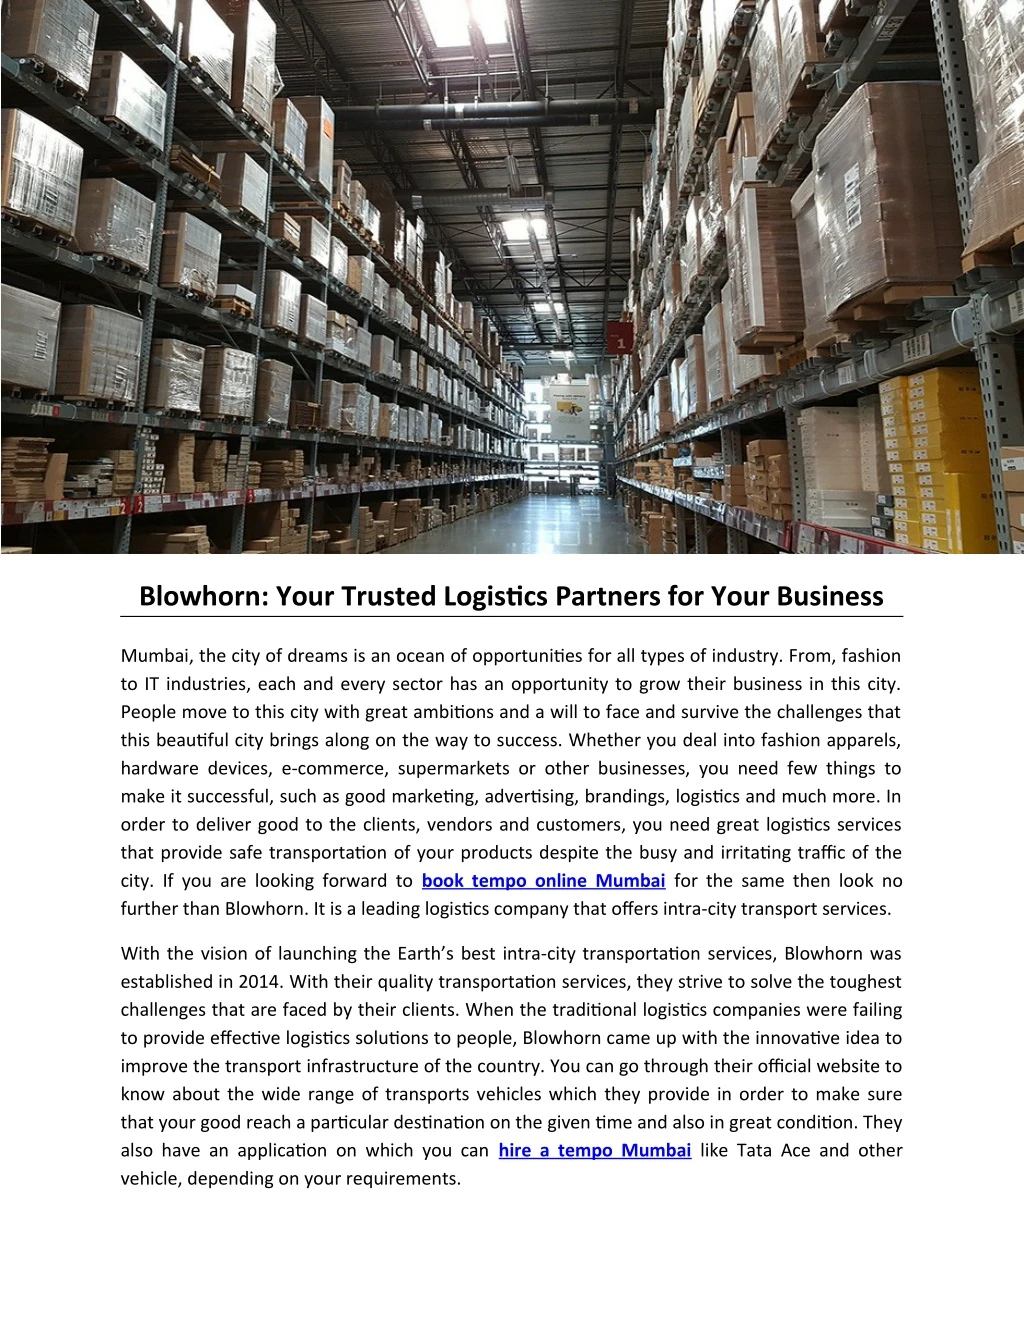 blowhorn your trusted logistics partners for your